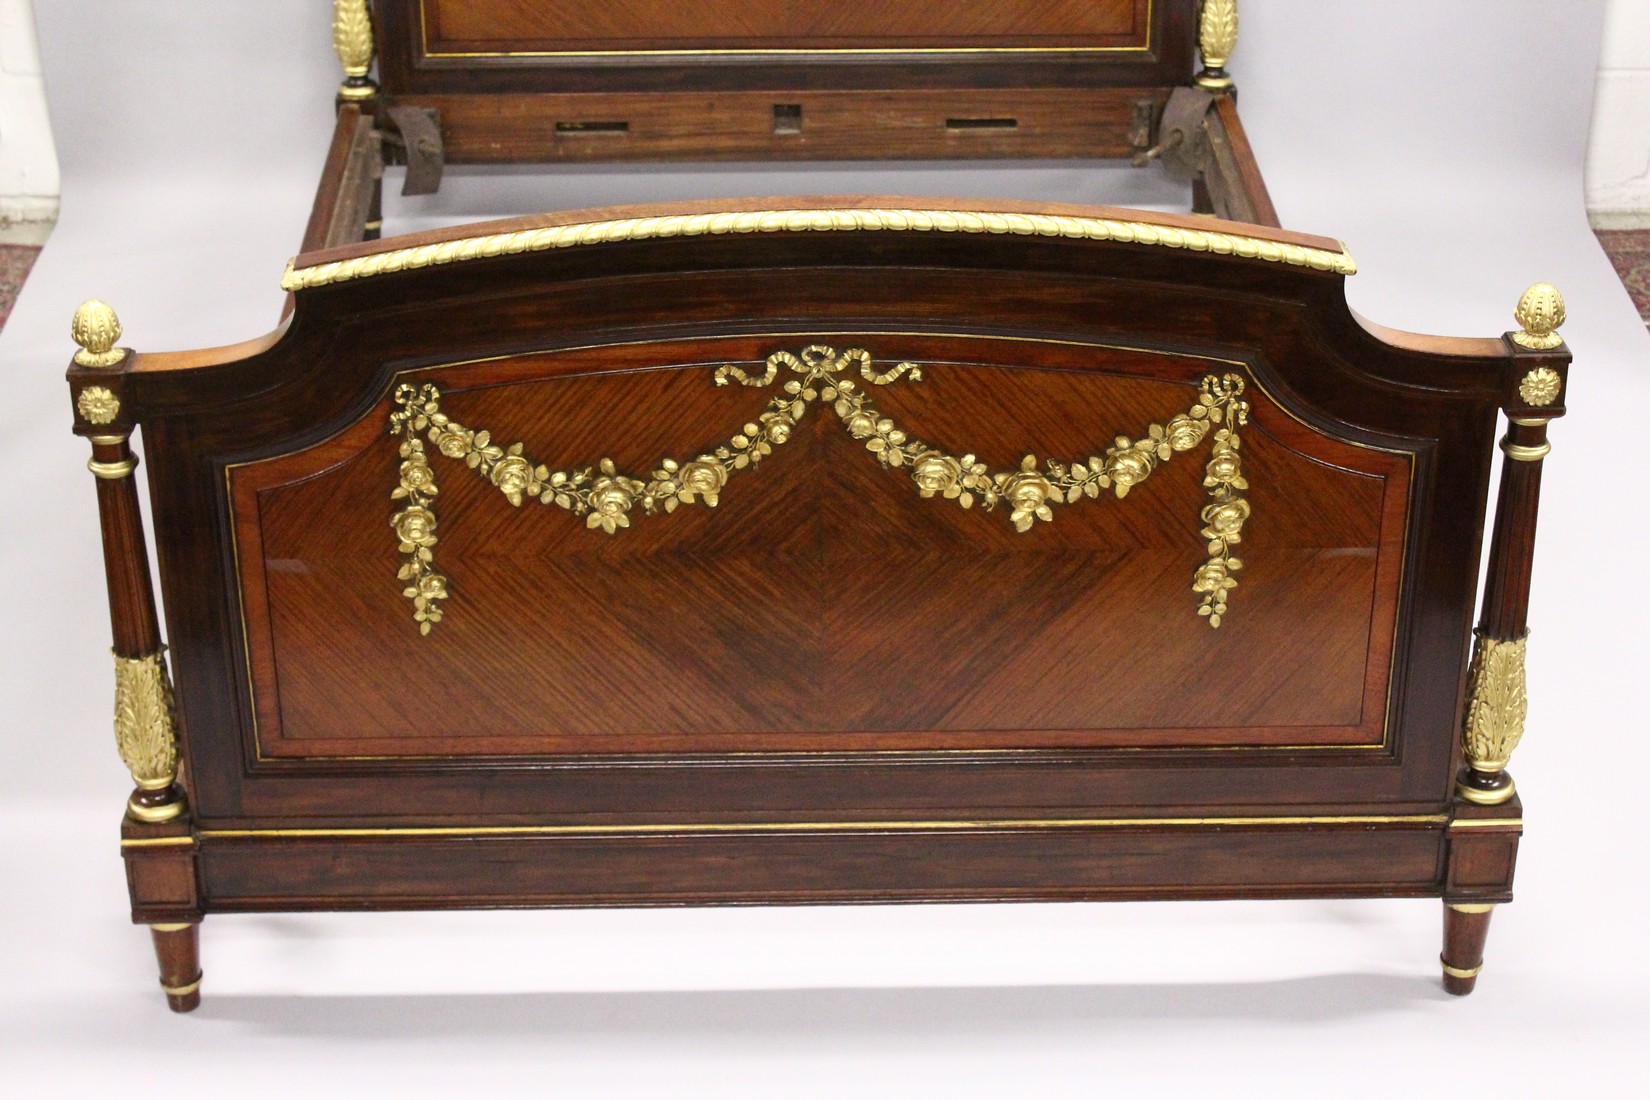 A GOOD LATE 19TH CENTURY FRENCH LOUIS XVI STYLE KINGWOOD MAHOGANY AND ORMOLU BED FRAME, the - Image 2 of 7